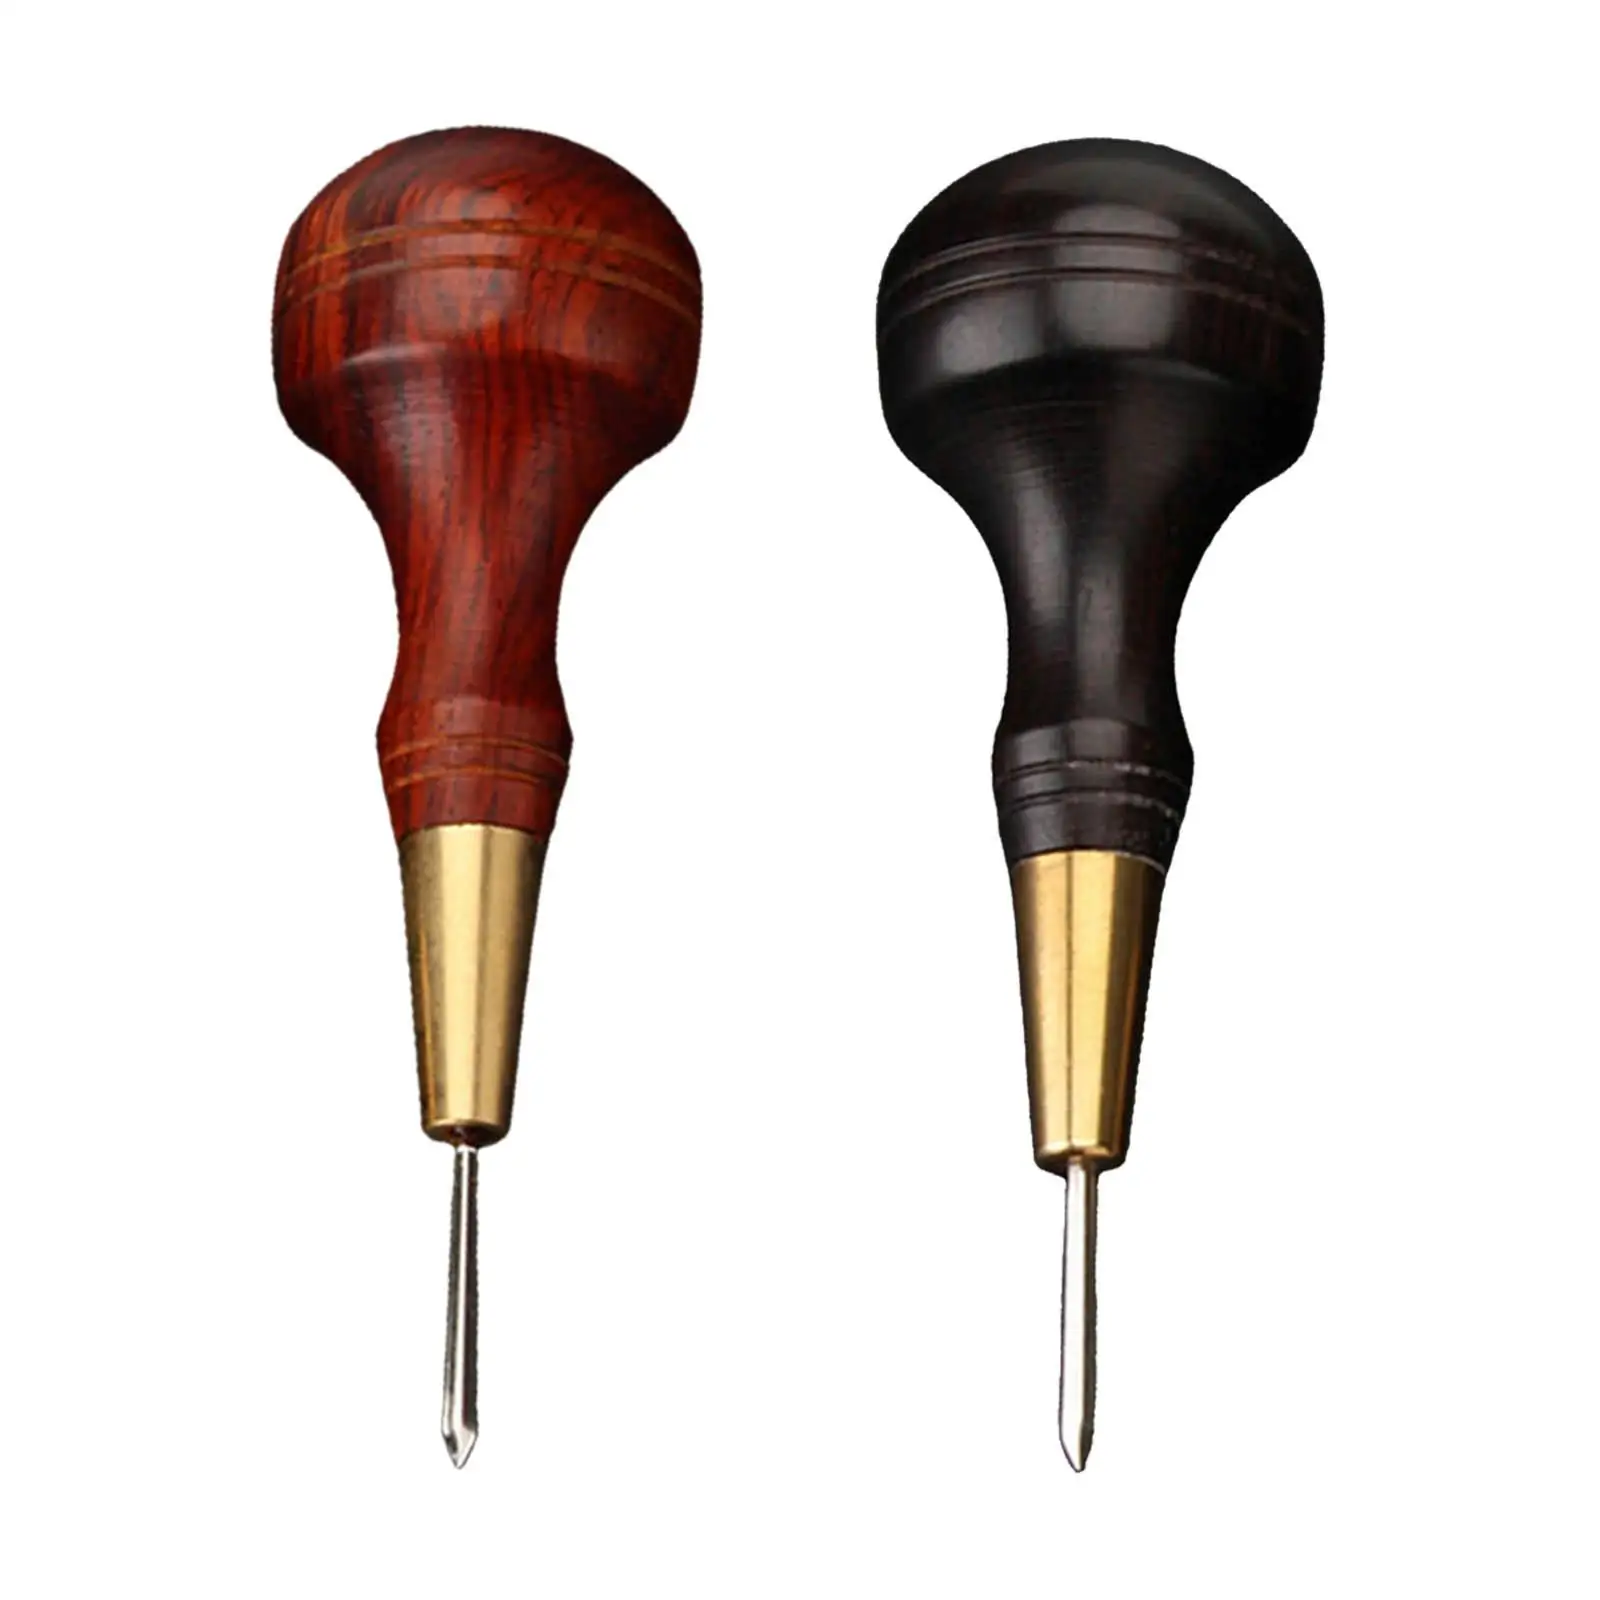 Wooden Handle Stitching Awl Tool Hand Stitching Leather Sewing Diamond Shape Blade Scratch Awl for DIY Handmade Pin Punching